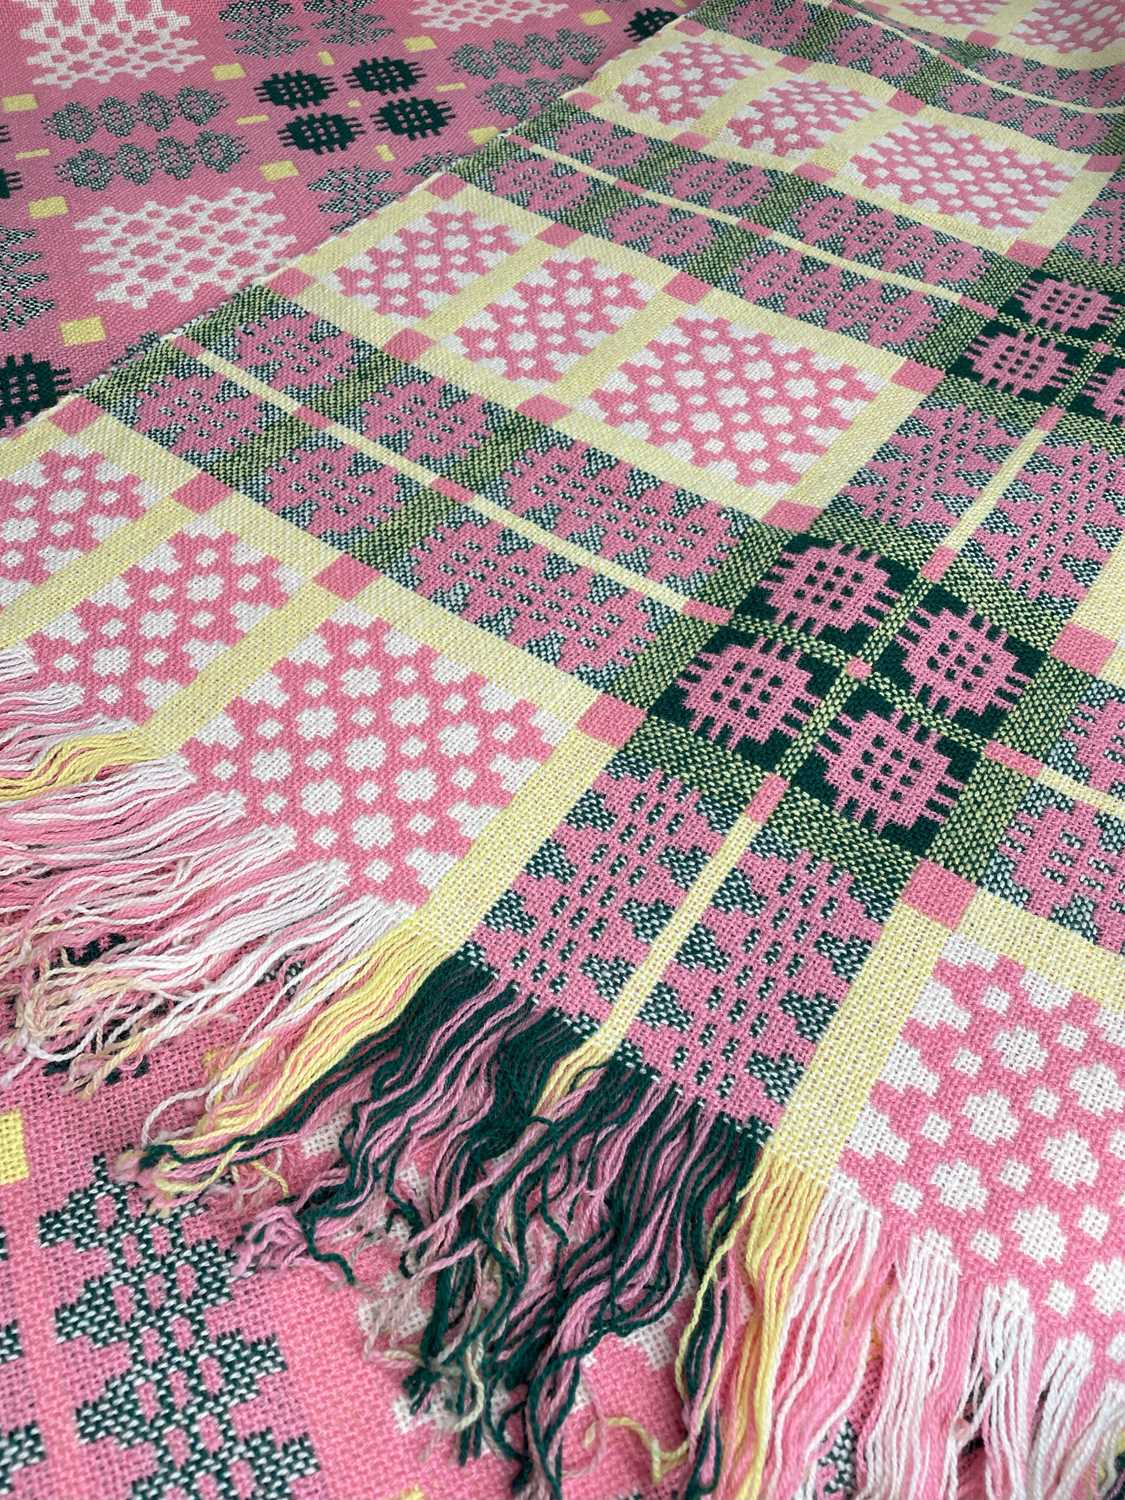 VINTAGE TRADITIONAL WELSH WOOLLEN BLANKET with yellow and green geometric design to a pink ground, - Image 2 of 3